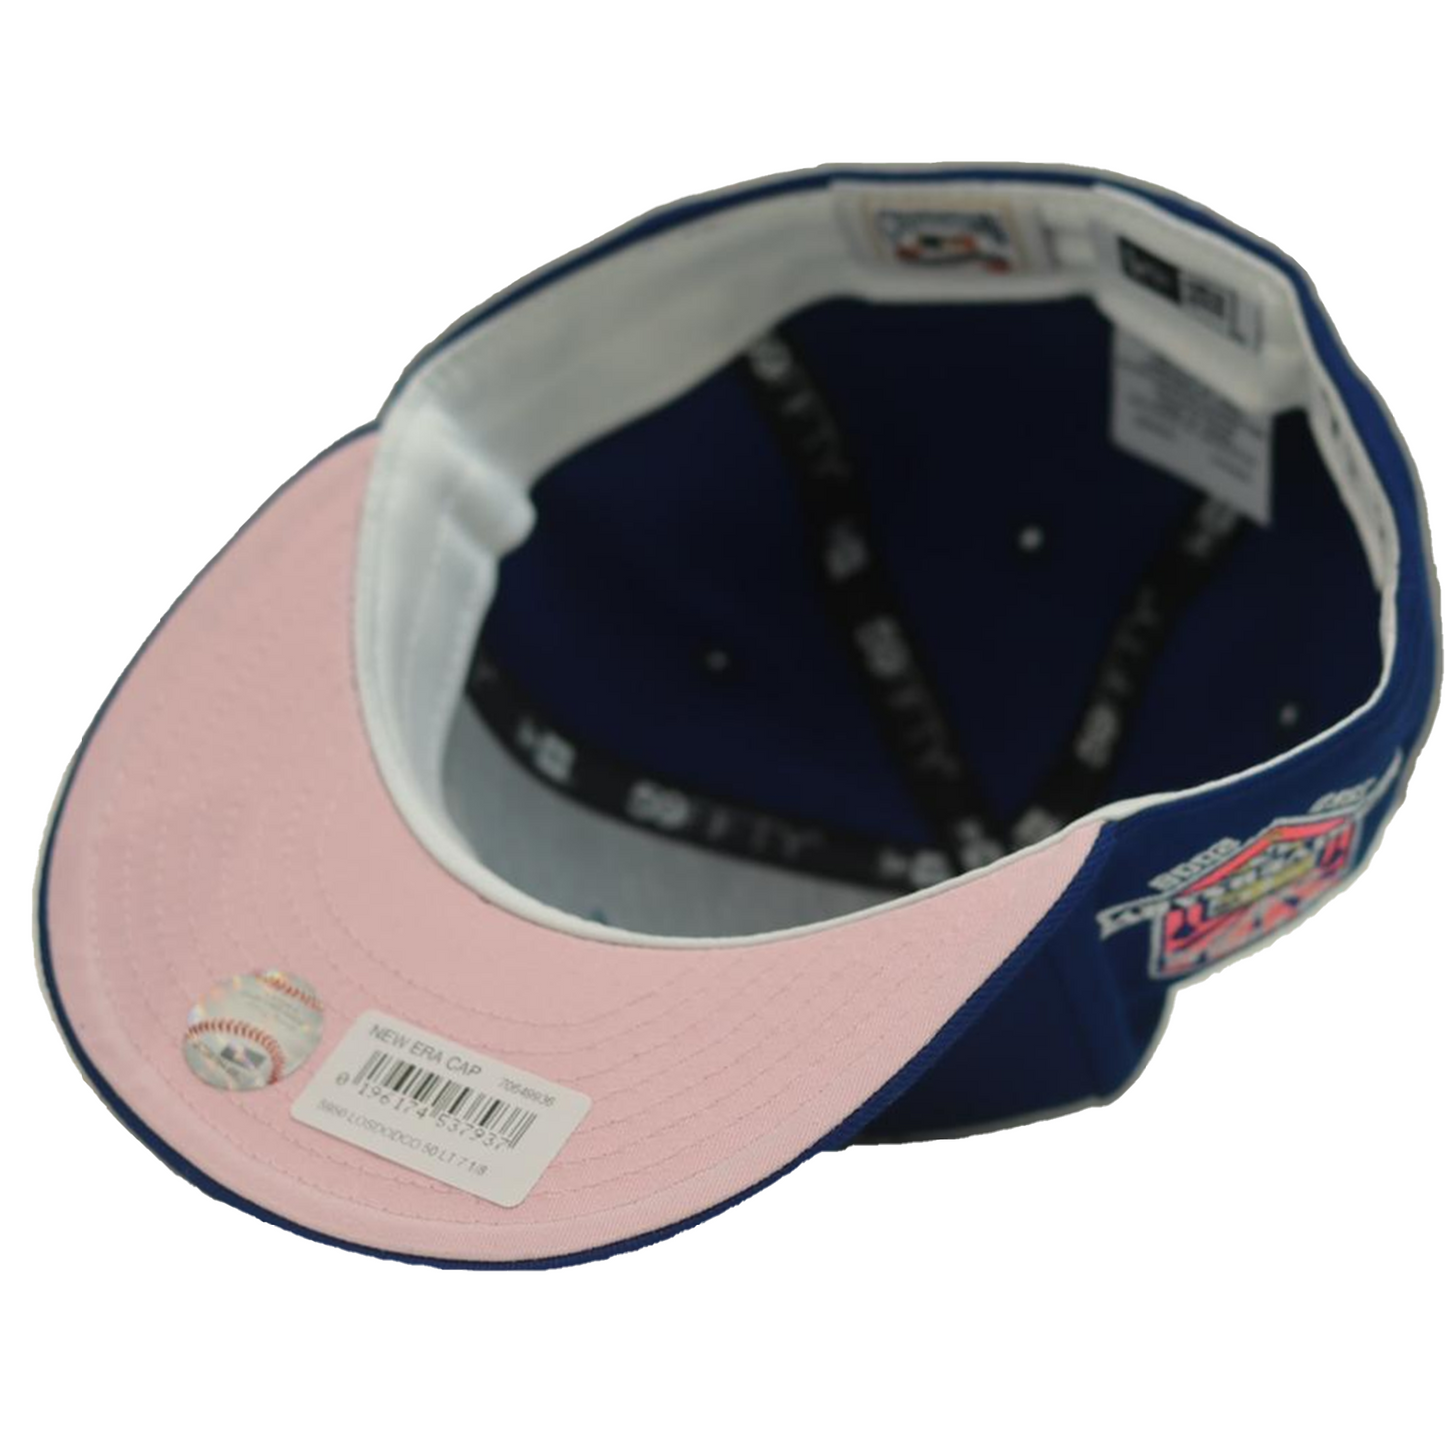 Los Angeles Dodgers Royal Blue Pink Heart Pink Undervisor Exclusive 59FIFTY Hat  🔵💗